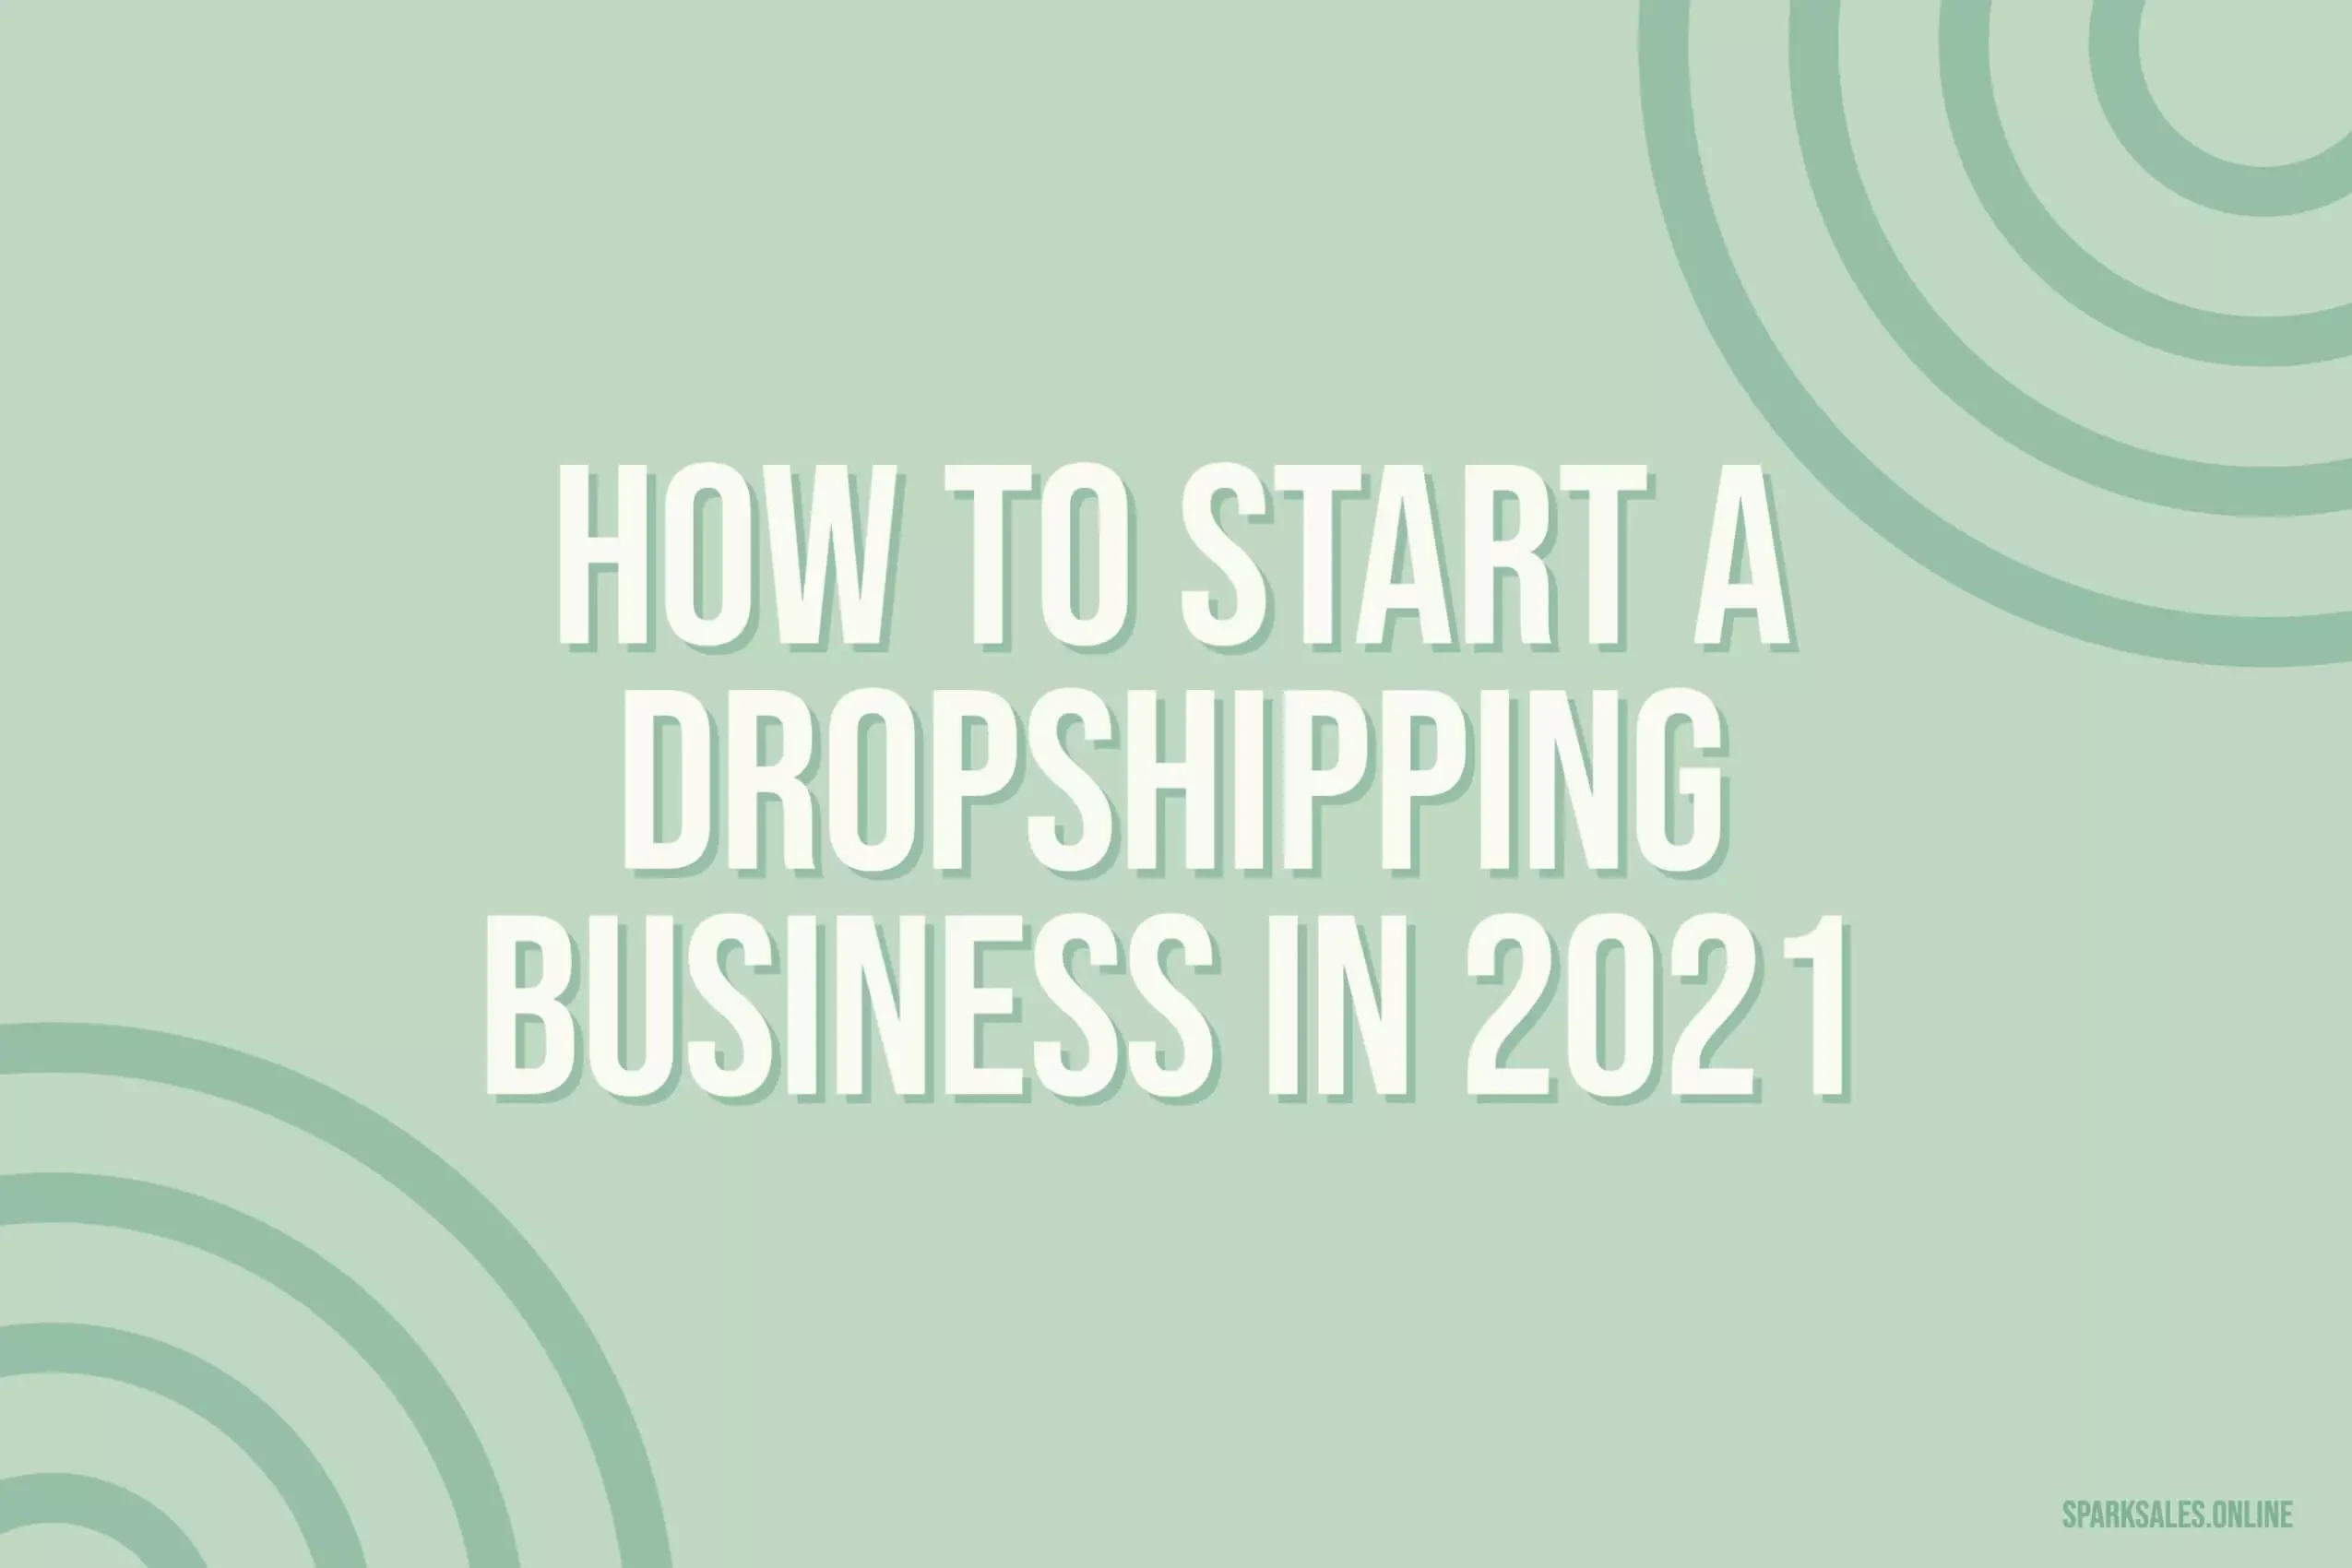 How To Start a Dropshipping Business in 2022